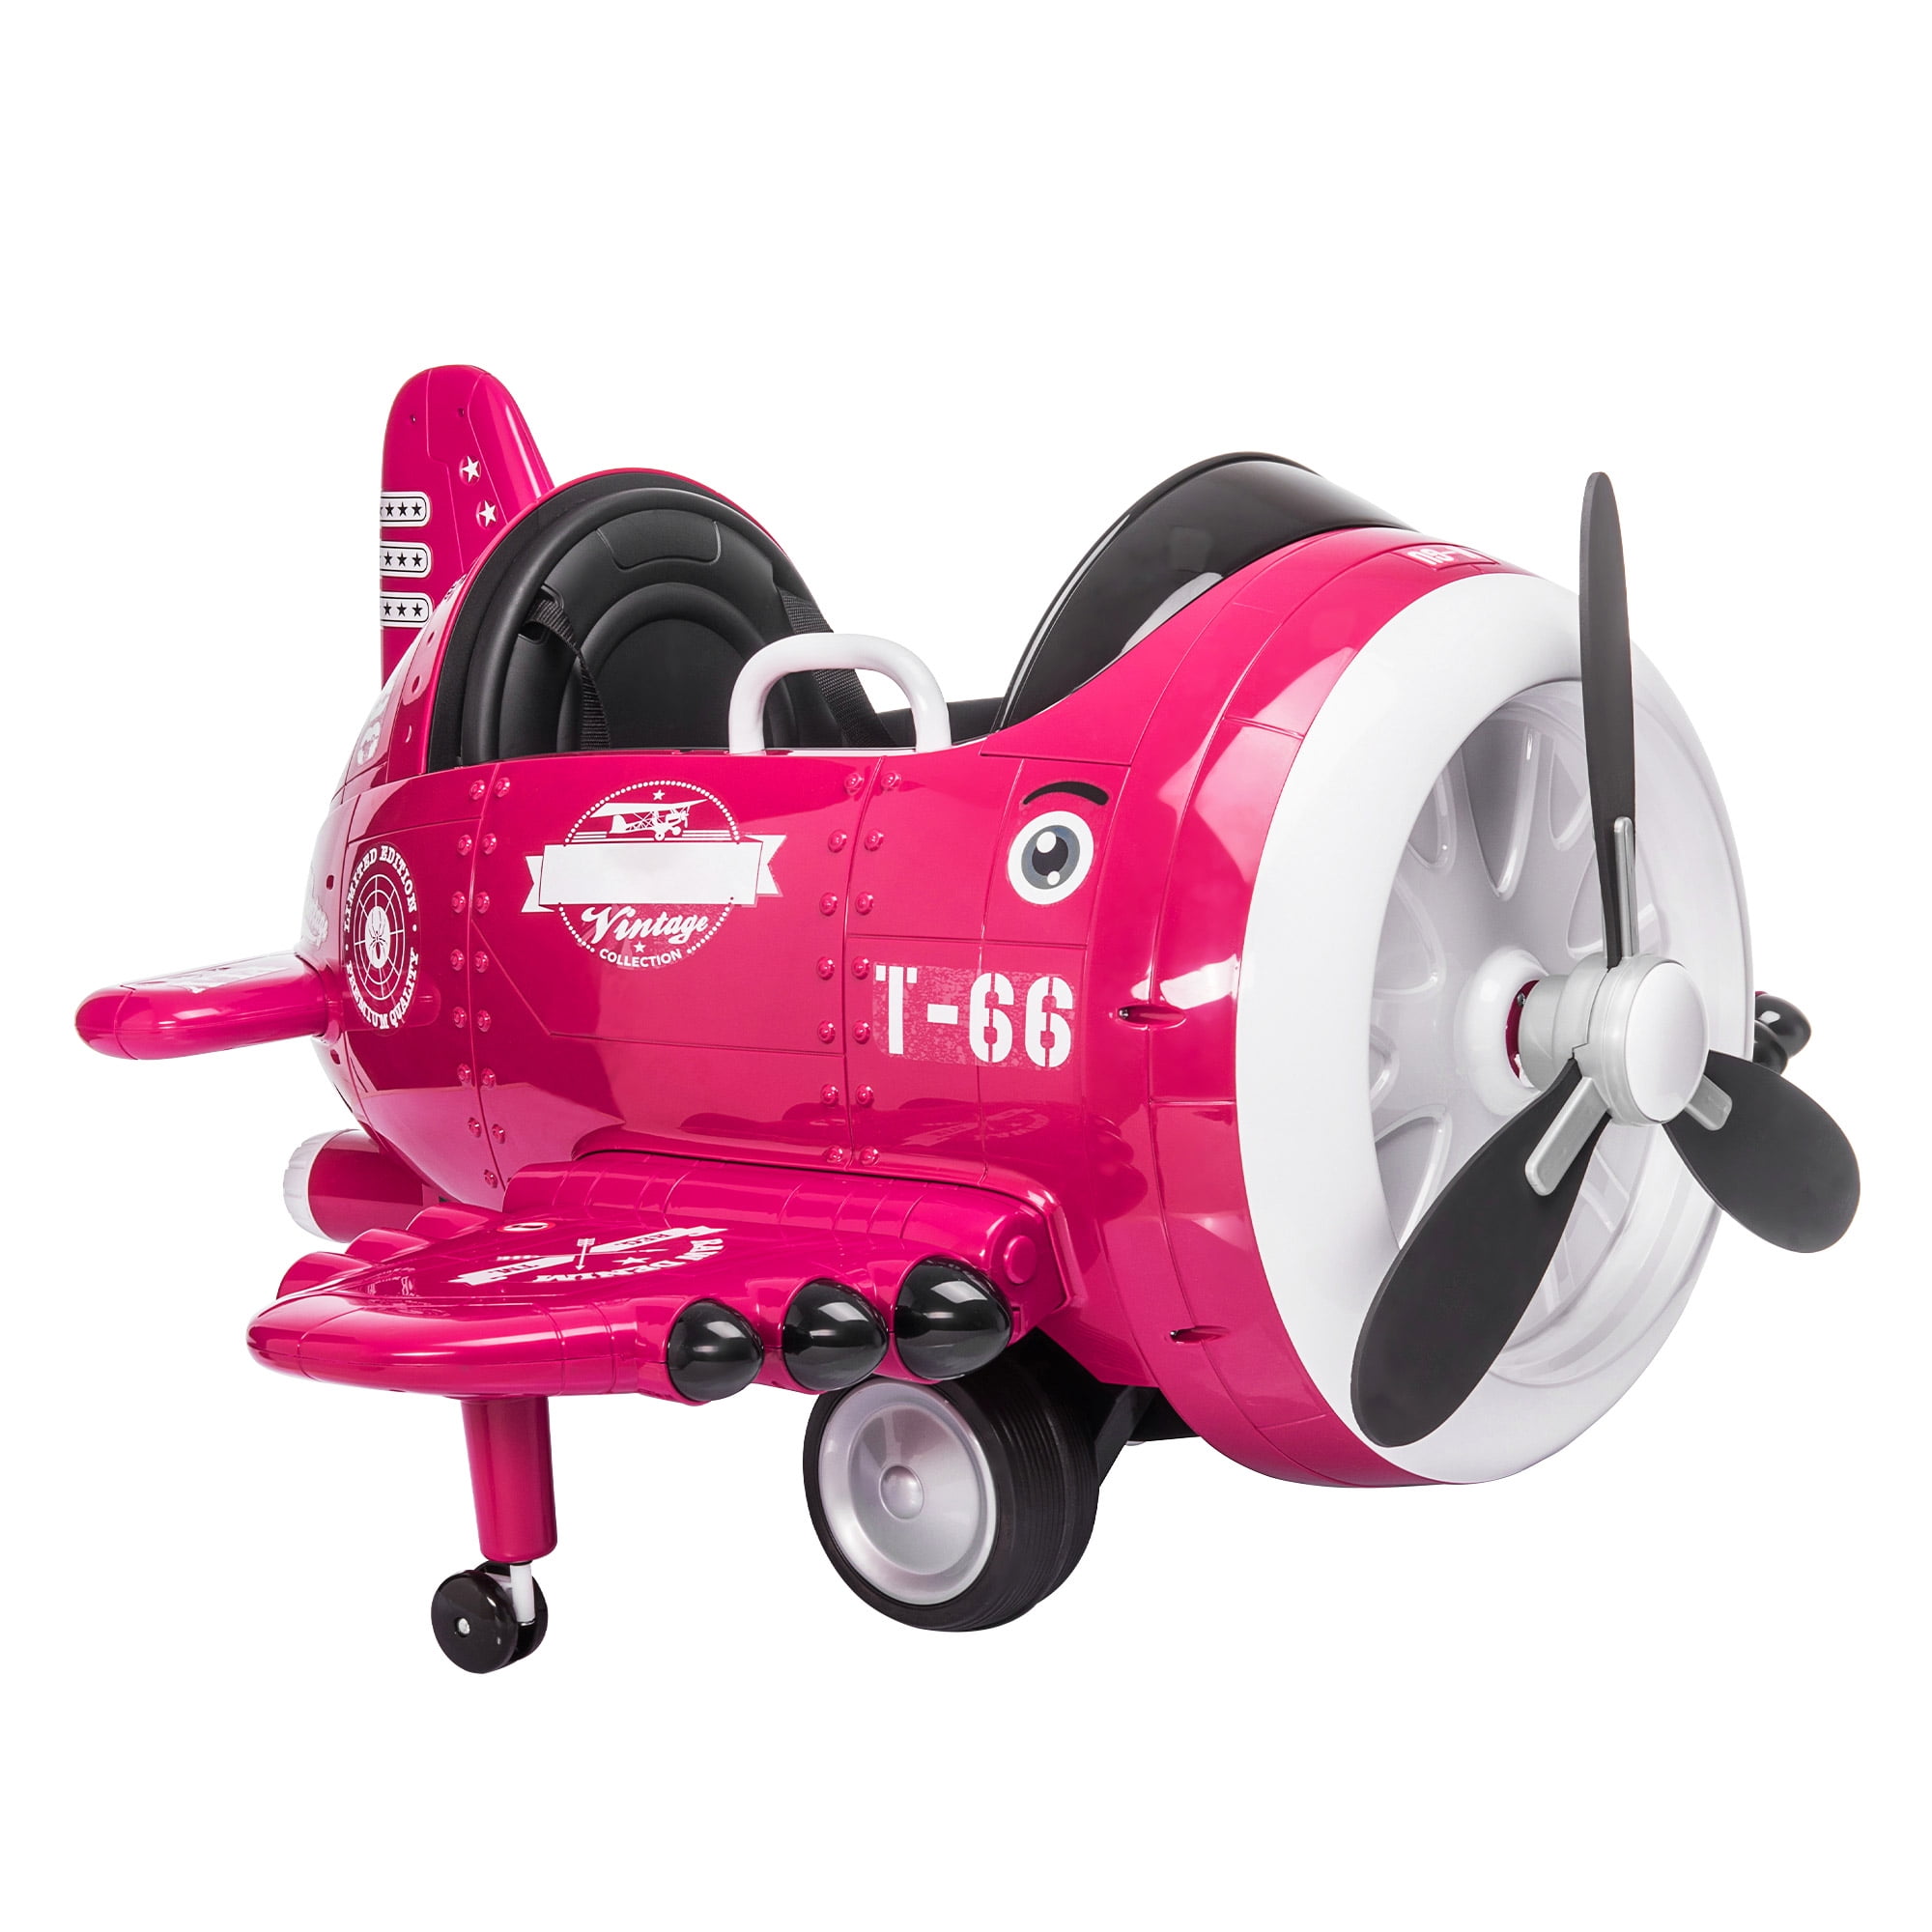 MABOTO Electric Kids Ride on Toy Plane with USB, , Propeller, 360-Degree Rotating by 2 Joysticks, Remote Control for Kids to 6, Rose Red Walmart.com